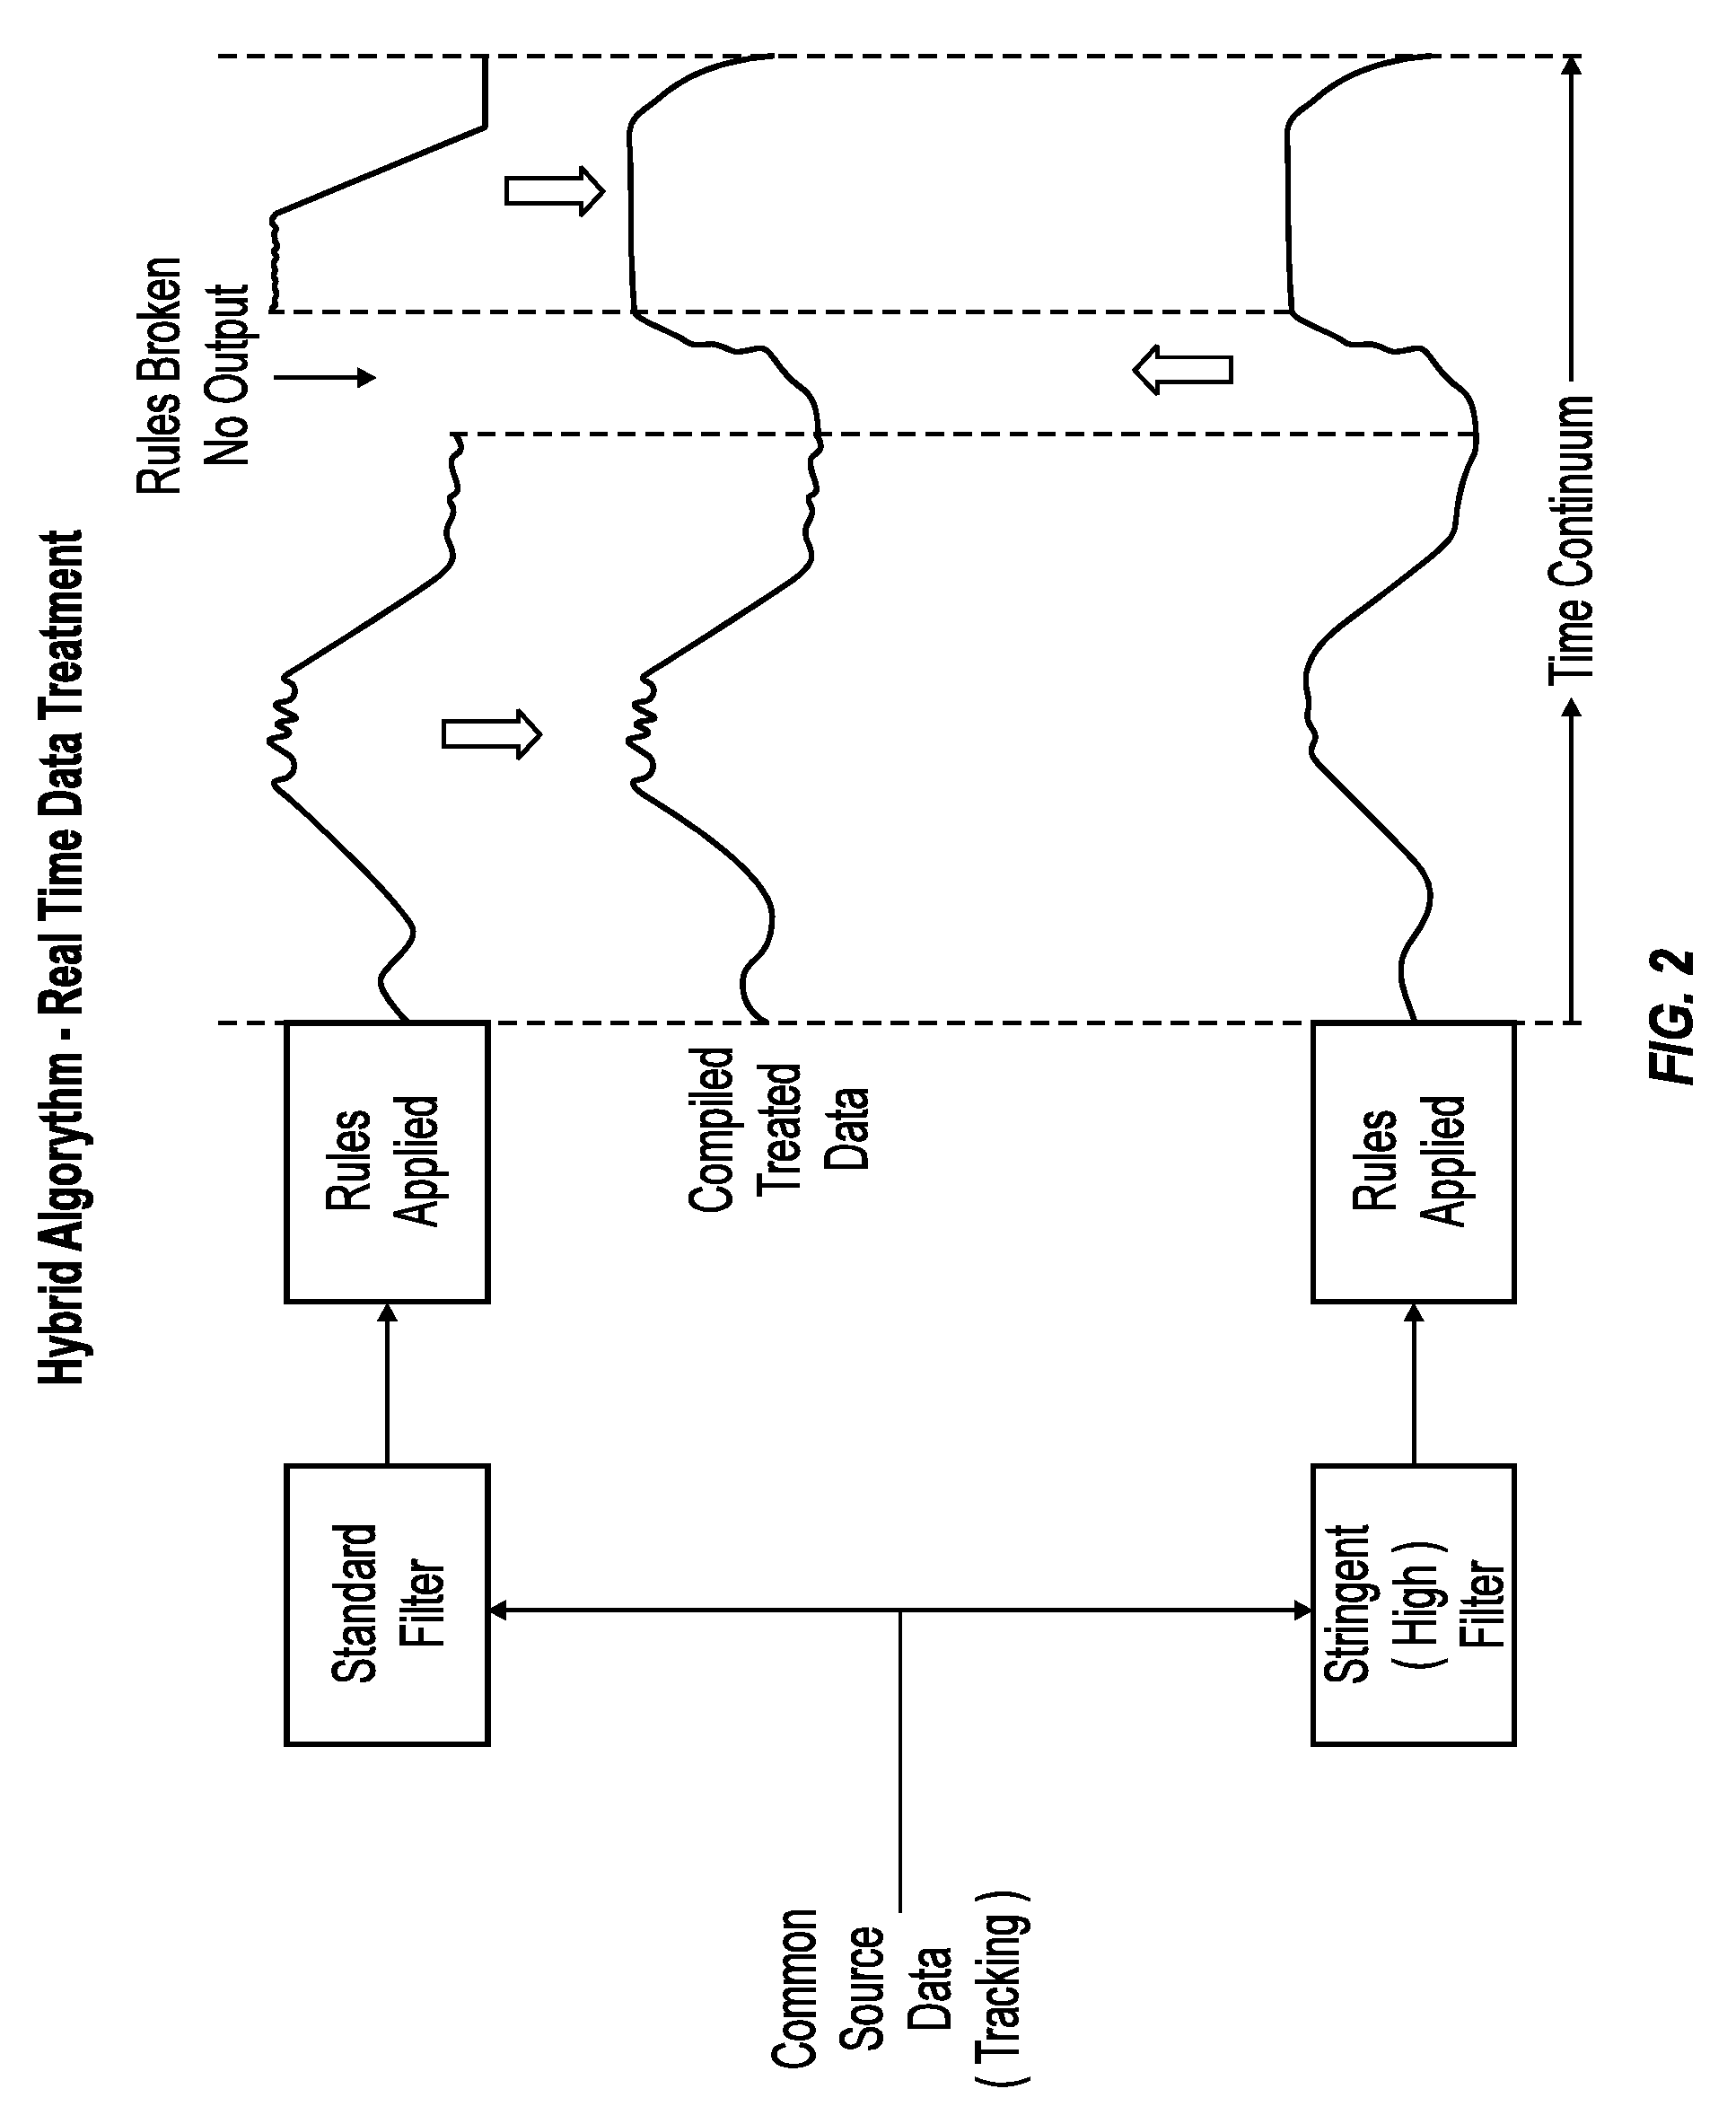 Method and arrangement for interpreting a subjects head and eye activity